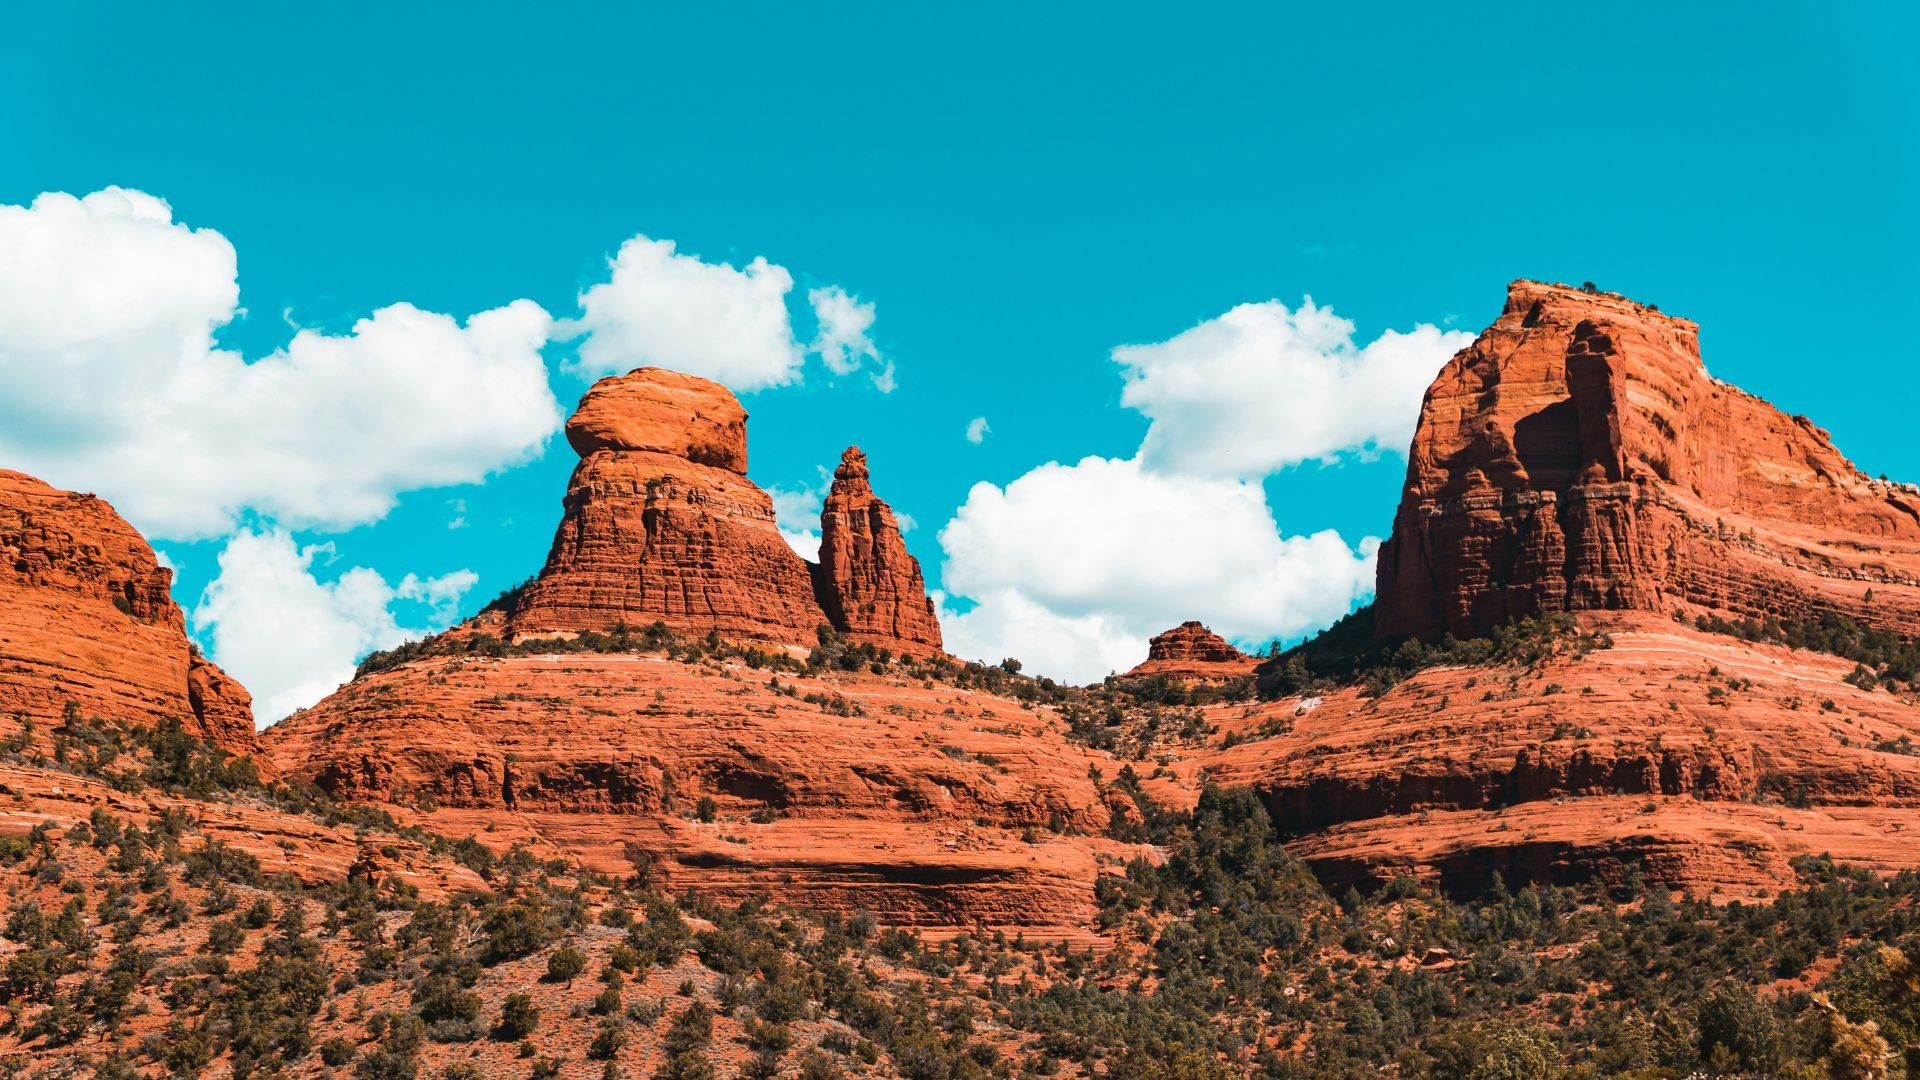 <p>While tourism in Sedona may help many local businesses, it has also completely harmed the city’s overall housing situation. Now, homes are too expensive for many working residents.   </p> <p>Many homes in the area have also been turned into short-term rentals. This has led to a council agenda item <a href="https://www.washingtonpost.com/nation/2024/03/19/sedona-homeless-sleep-car-housing-crisis/">stating</a> that this has resulted in “decreasing housing availability for locals.”     </p>